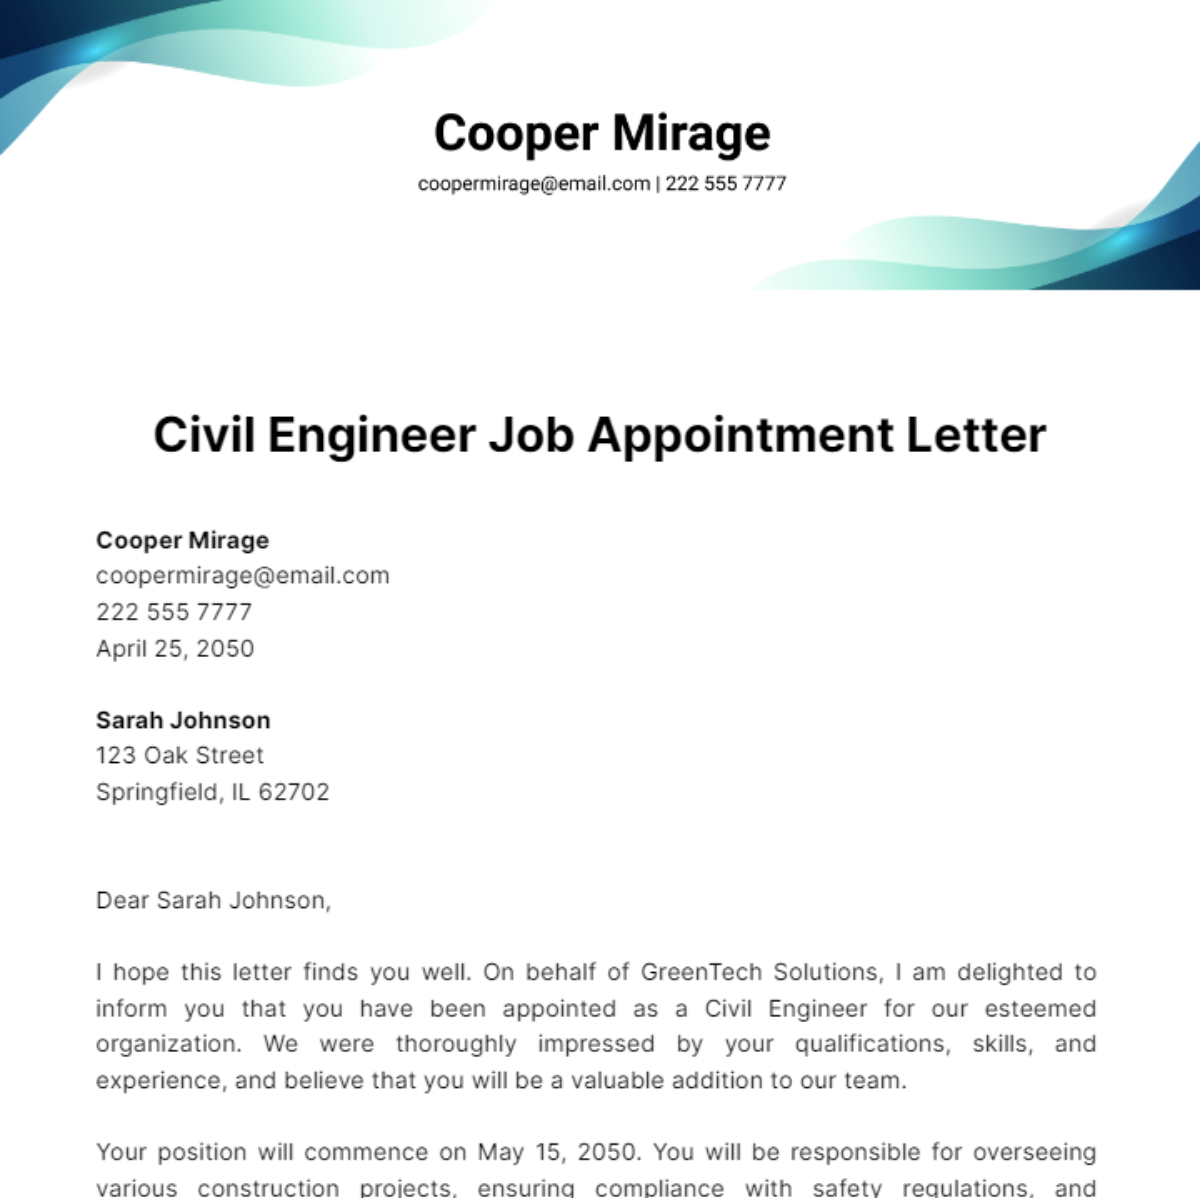 Civil Engineer Job Appointment Letter Template